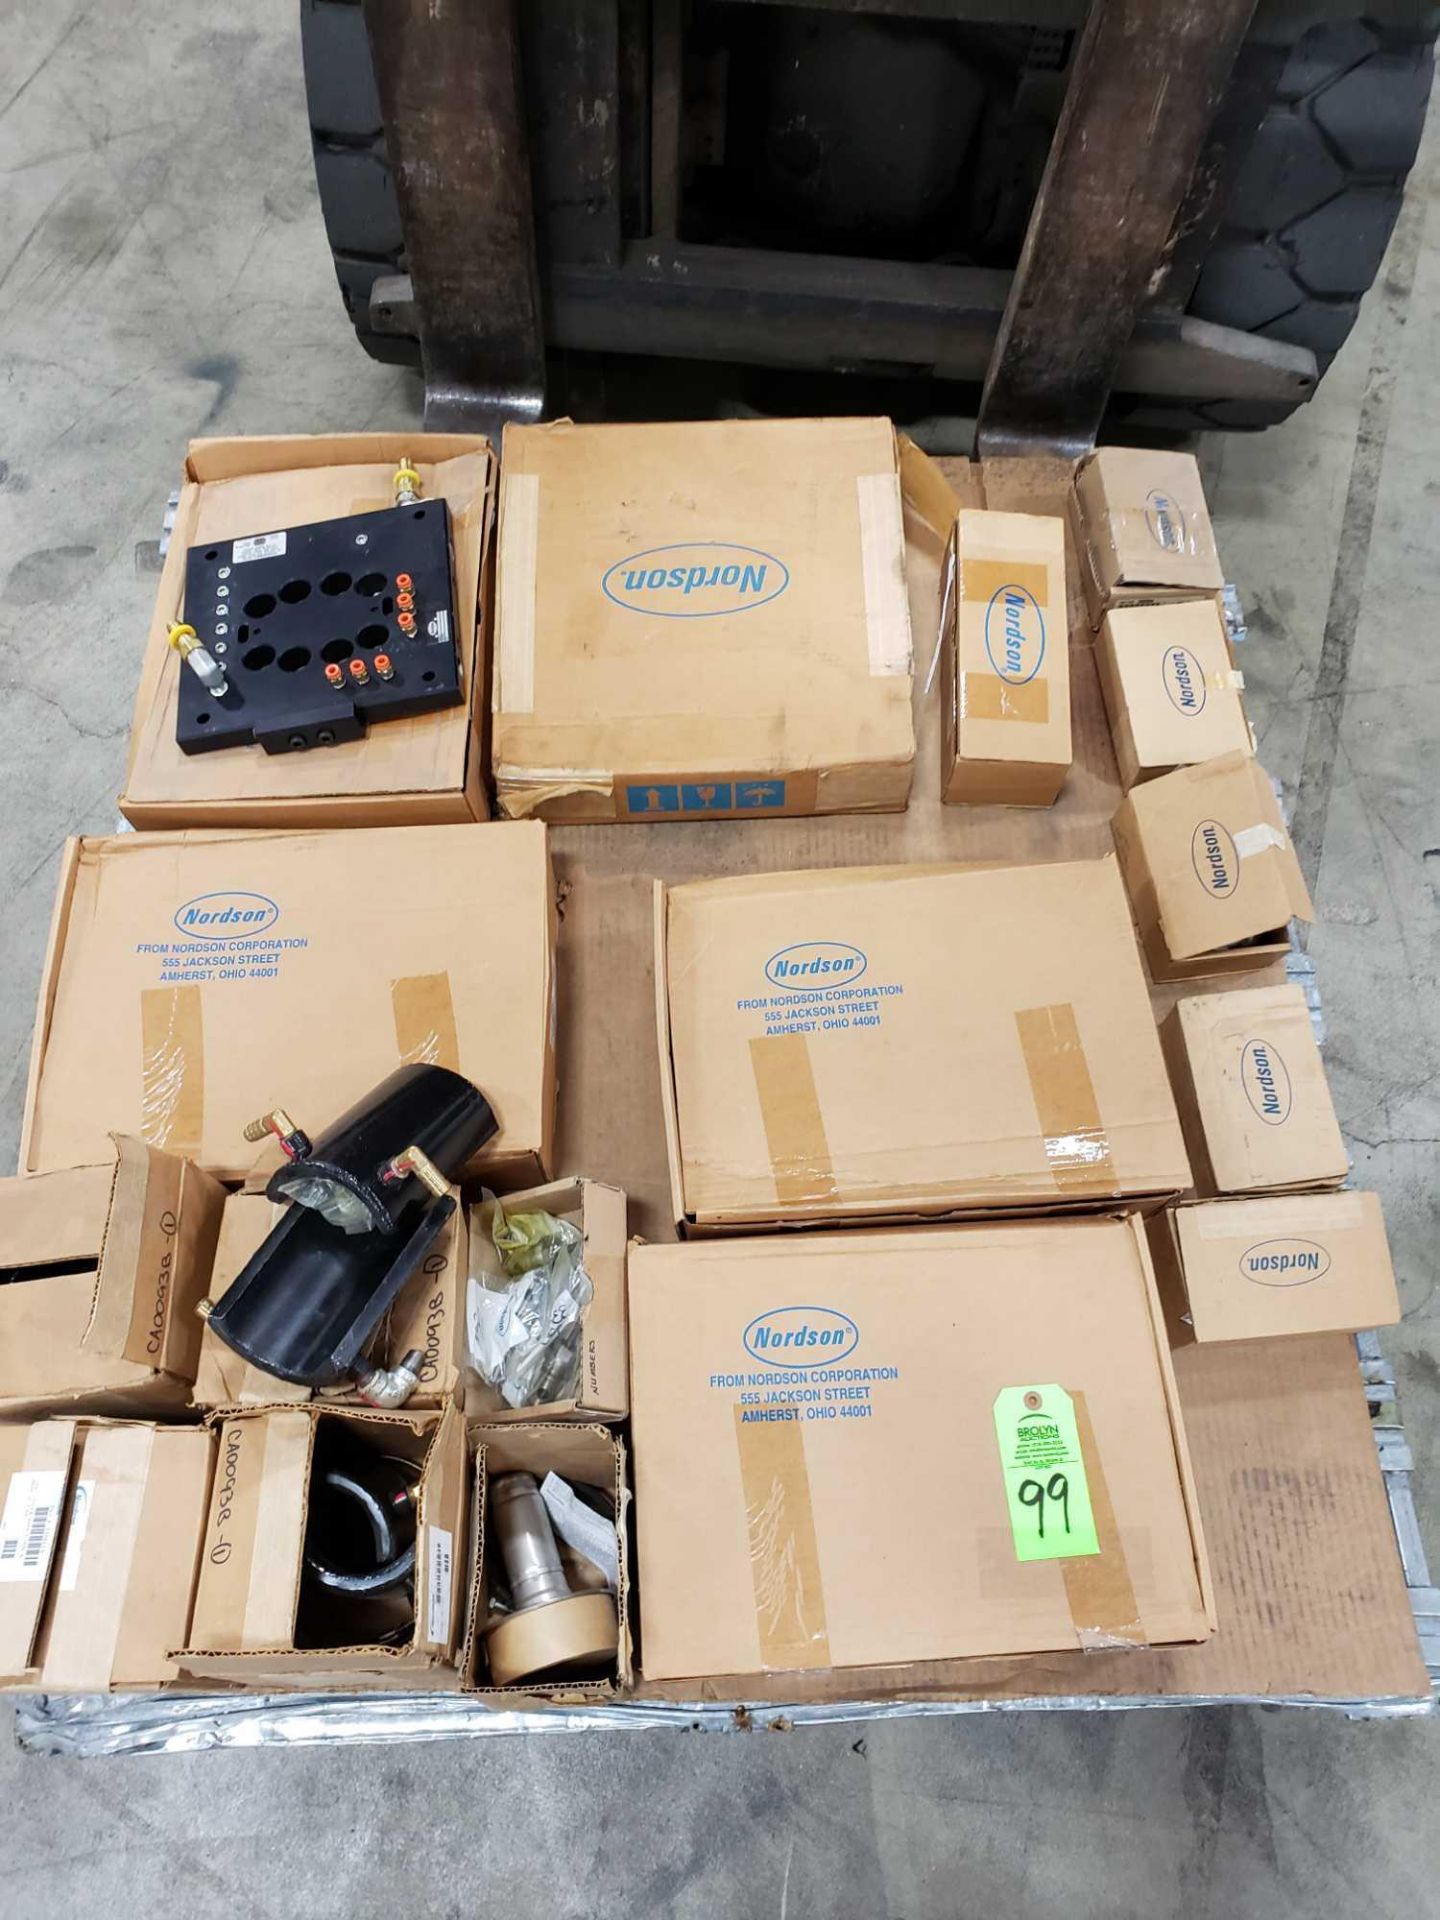 Pallet of assorted Nordson parts new in boxes.